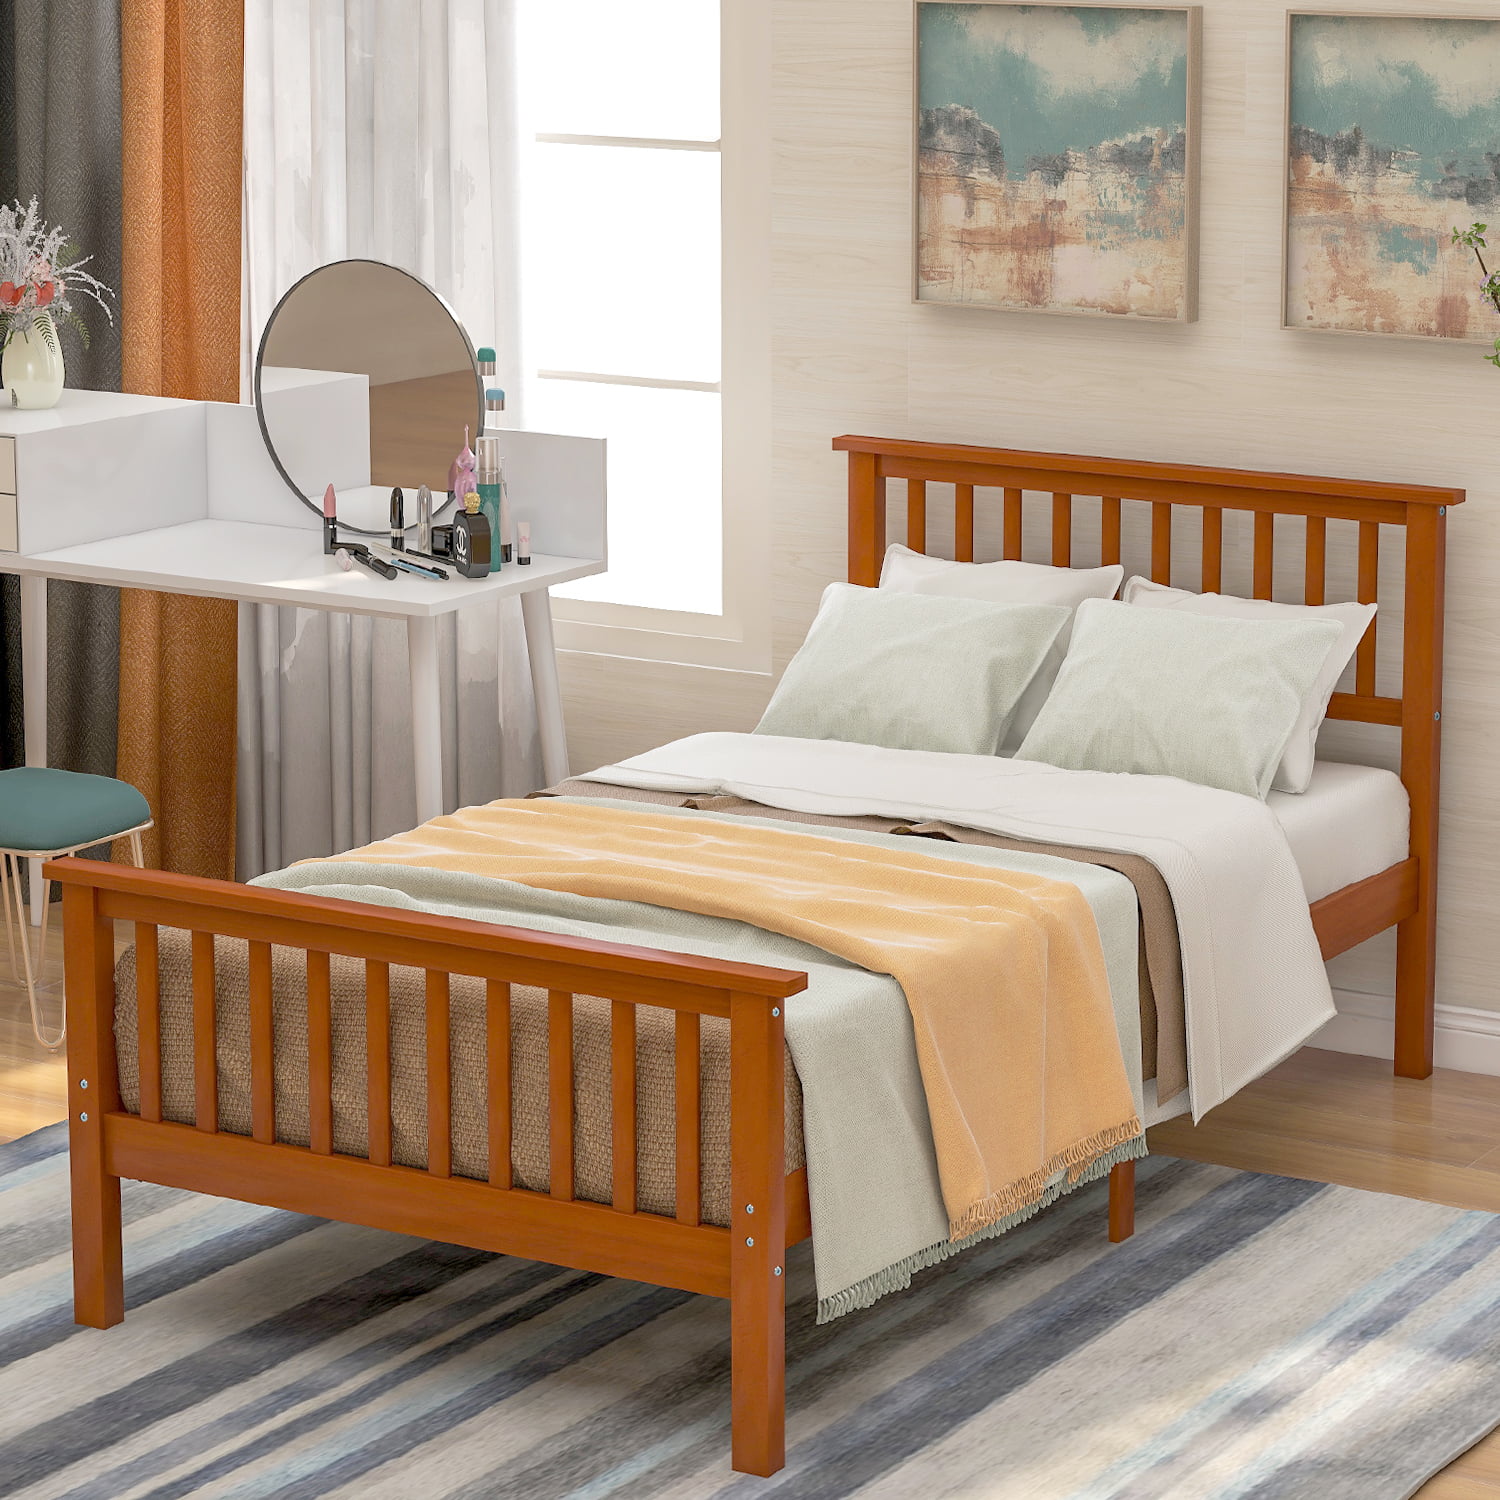 Twin Bed Frame, Modern Wood Platform Bed Frame with Headboard and